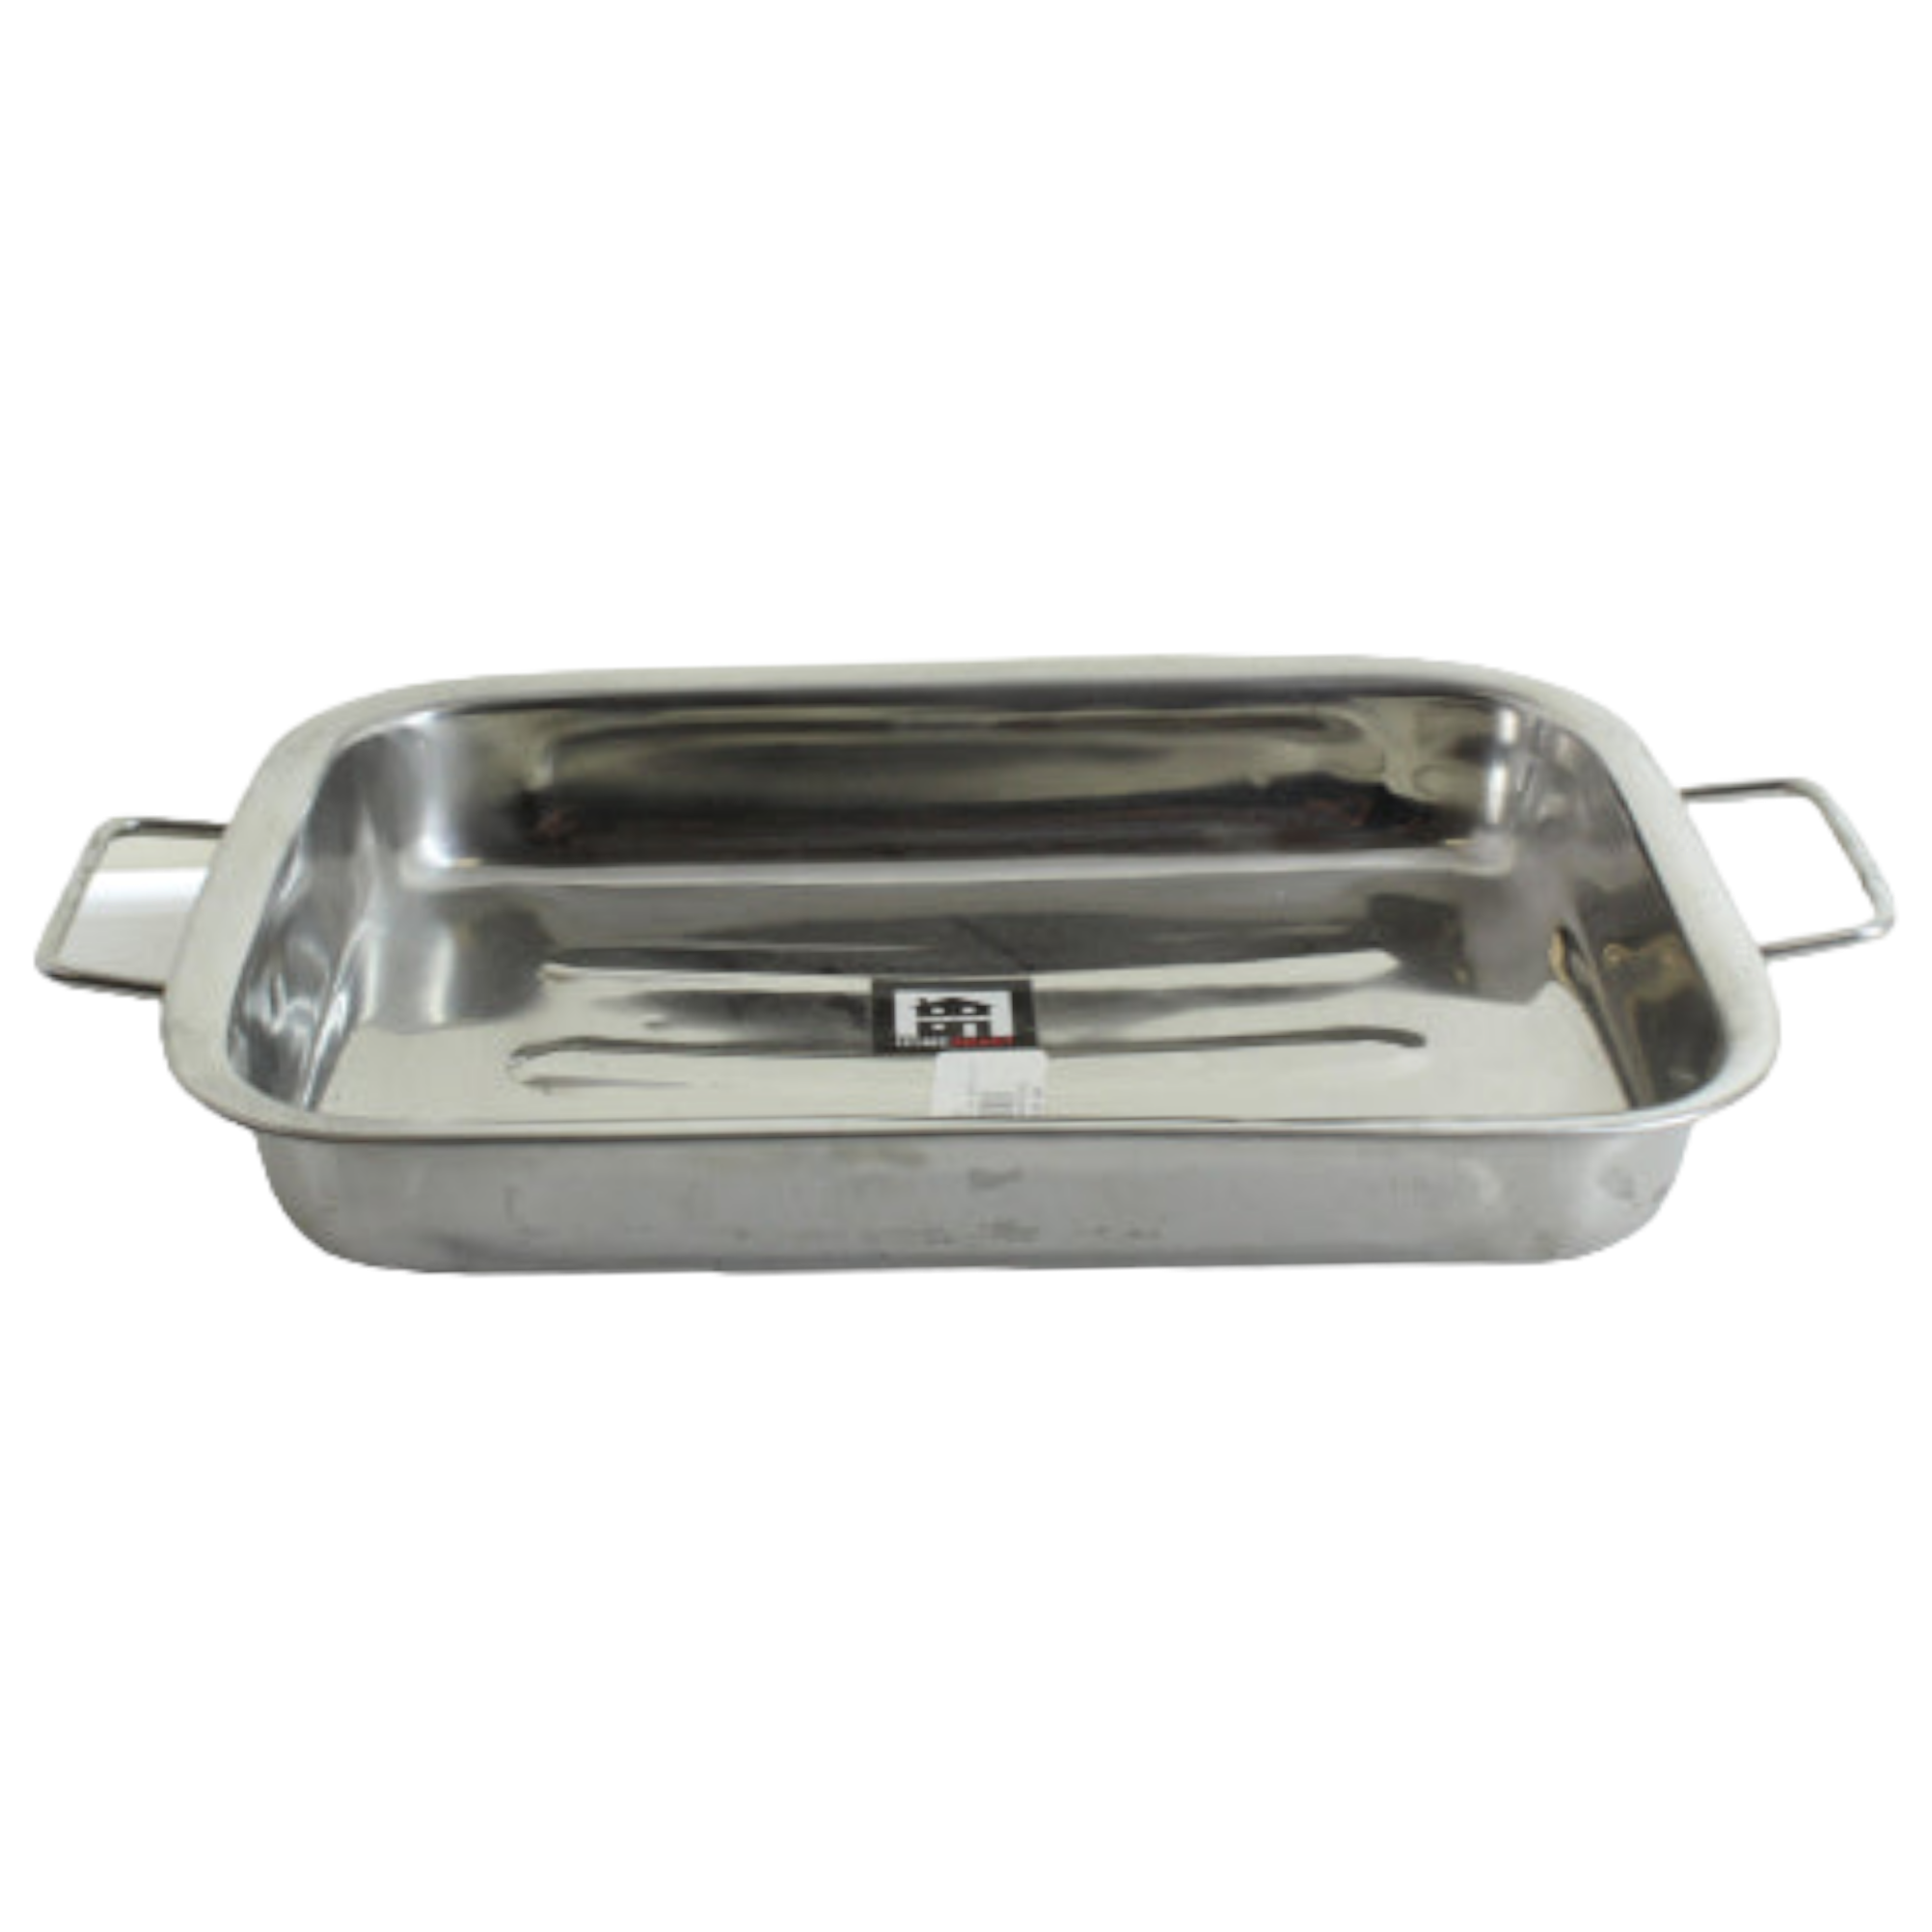 Roasting Tray Stainless Steel with handle 30cm MV2037